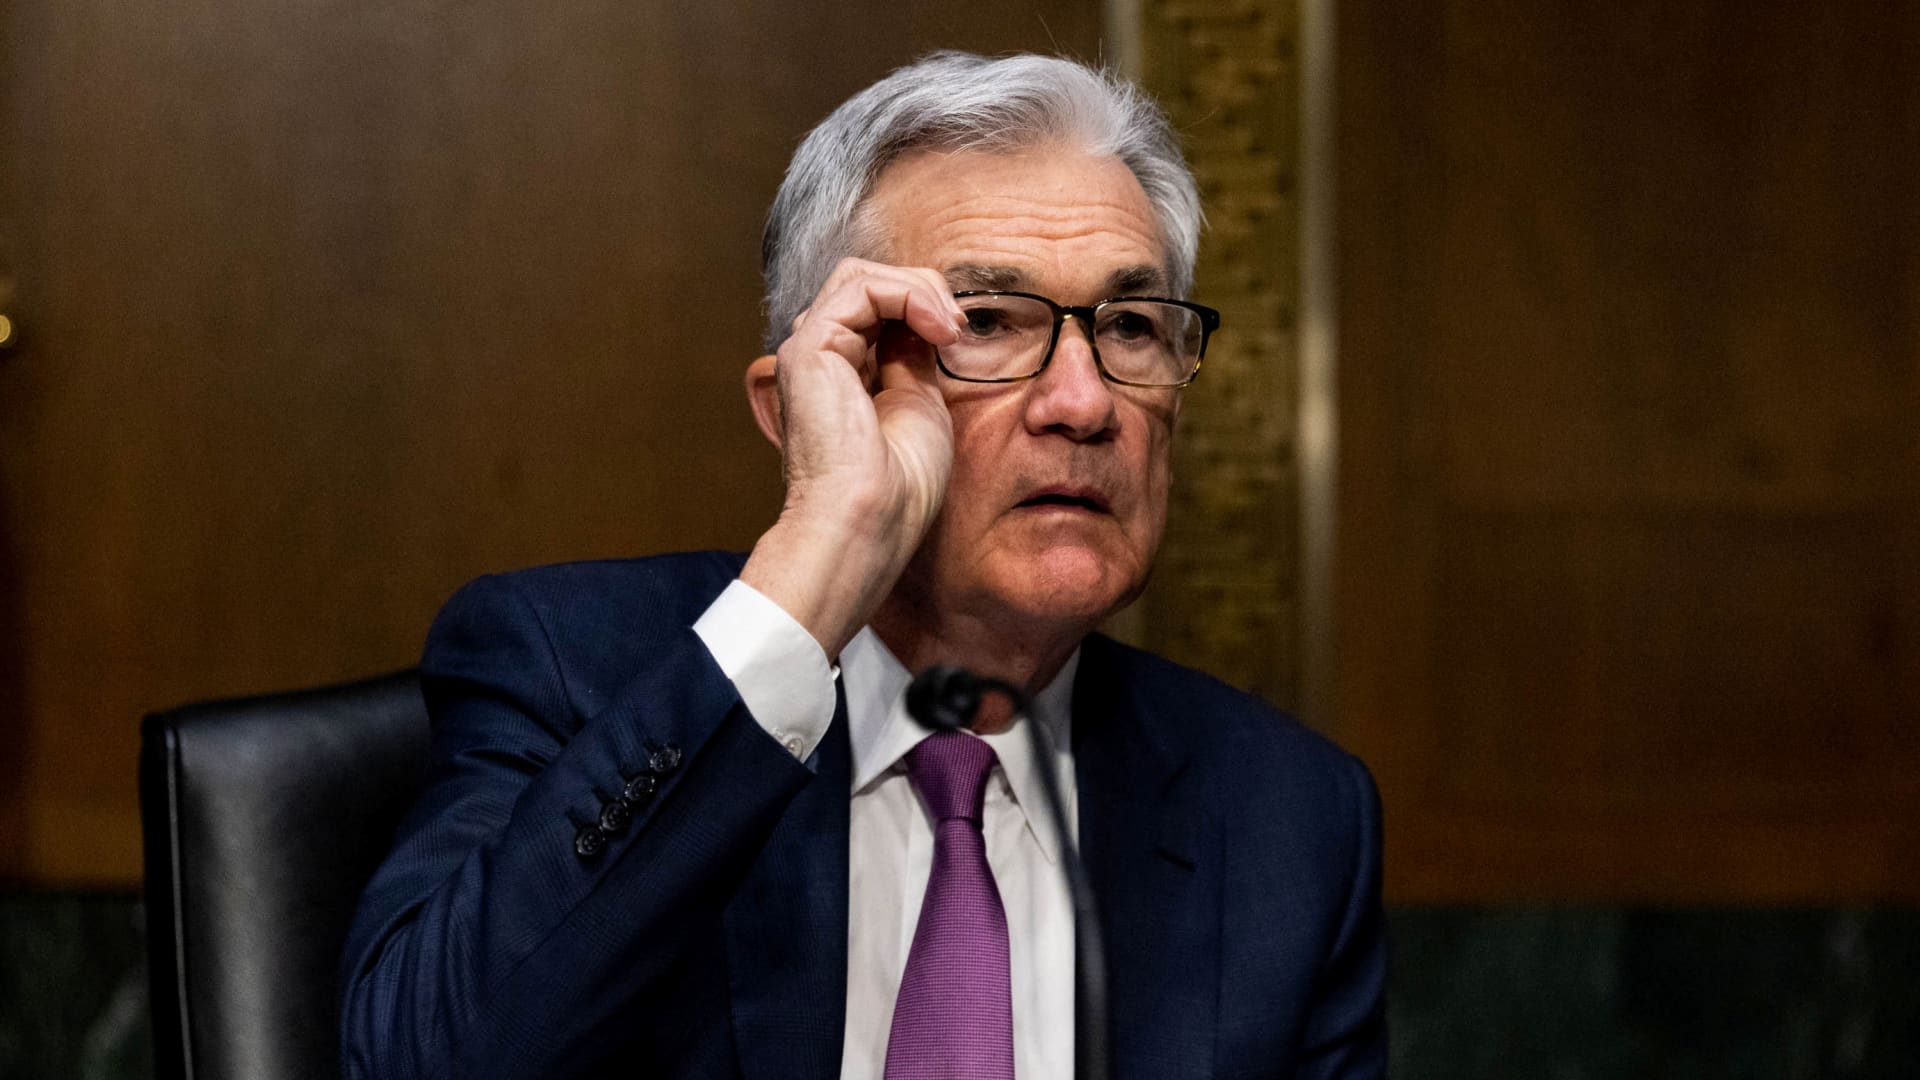 Powell says taming inflation is "absolutely necessary" and a 50 basis point increase is possible in May